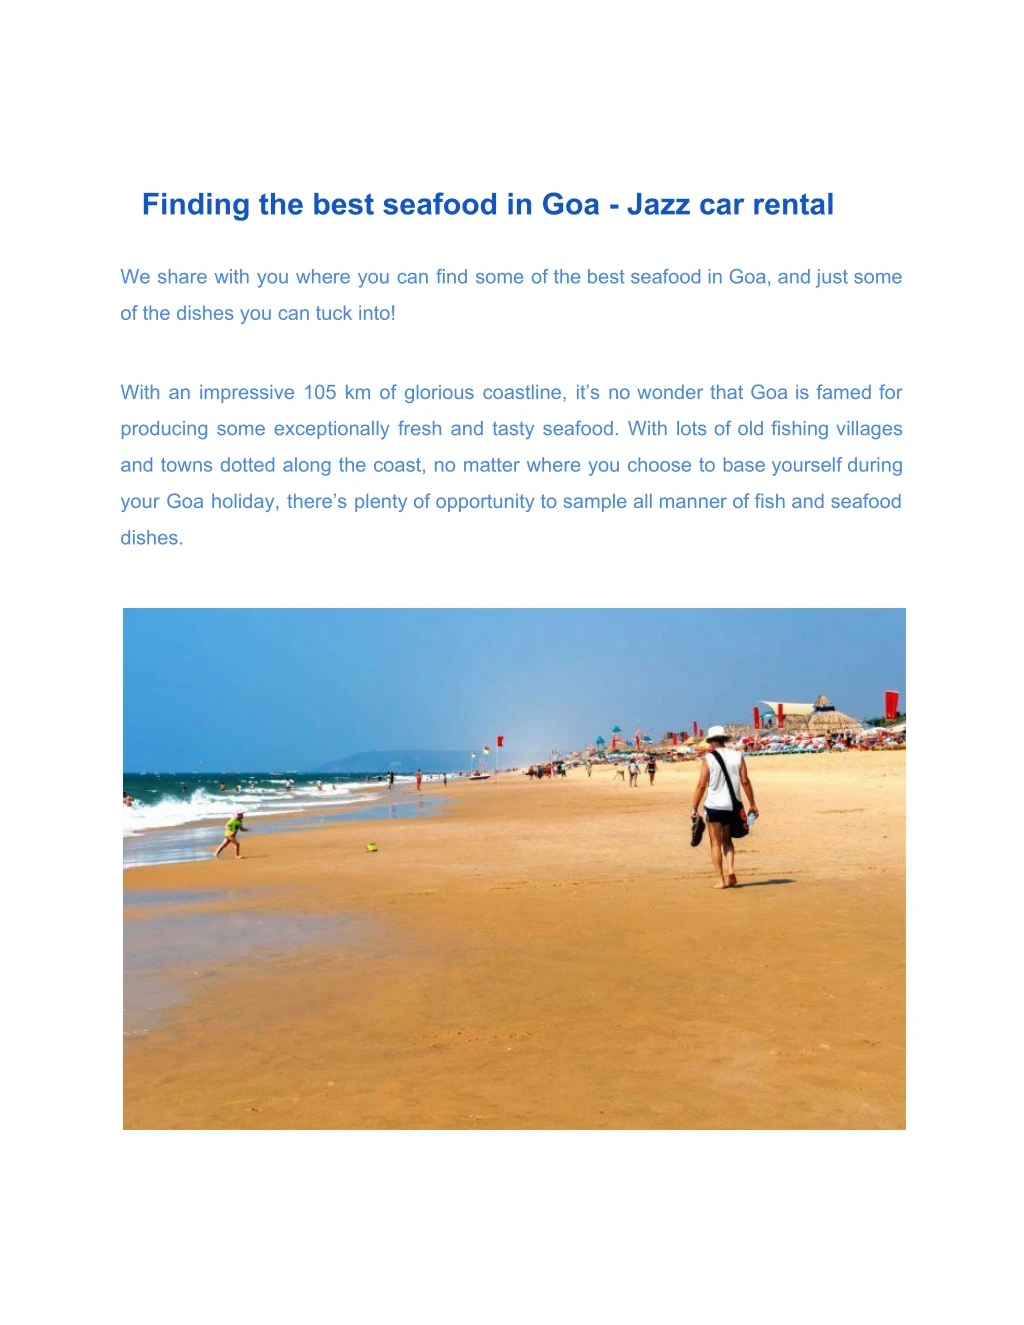 finding the best seafood in goa jazz car rental